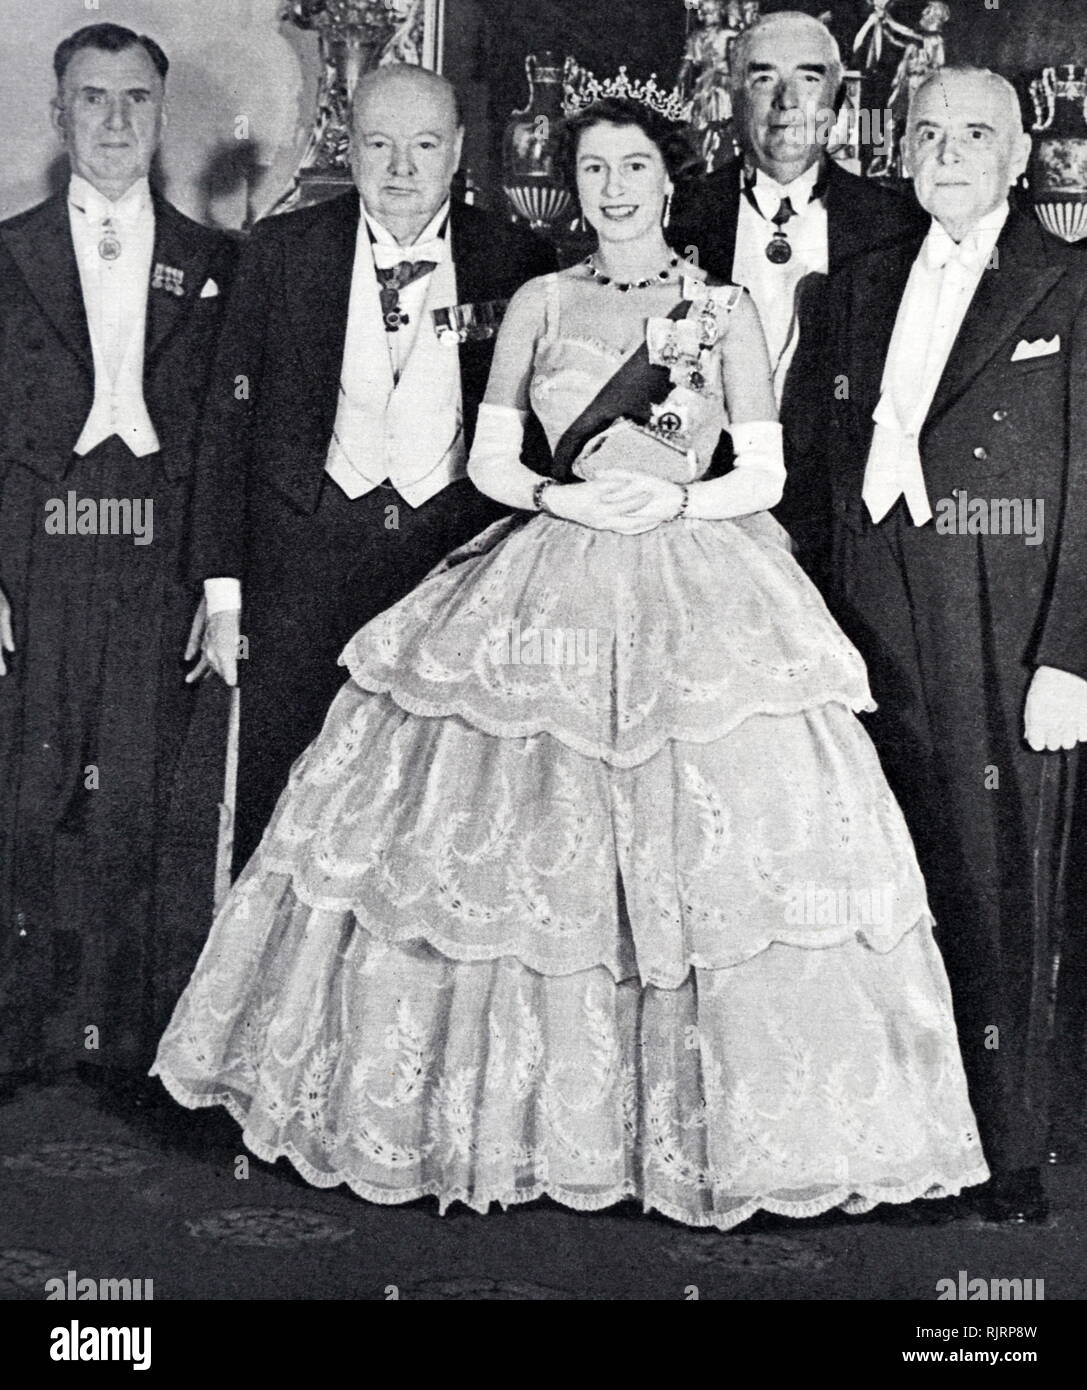 Queen Elizabeth II with Prime Ministers of the Commonwealth. 1952. She is shown here with Mr S. G. Holland (New Zealand), Sir Winston Churchill, Mr Robert Menzies (Australia) and Mir. St. Laurent (Canada).&#13;&#10; Stock Photo